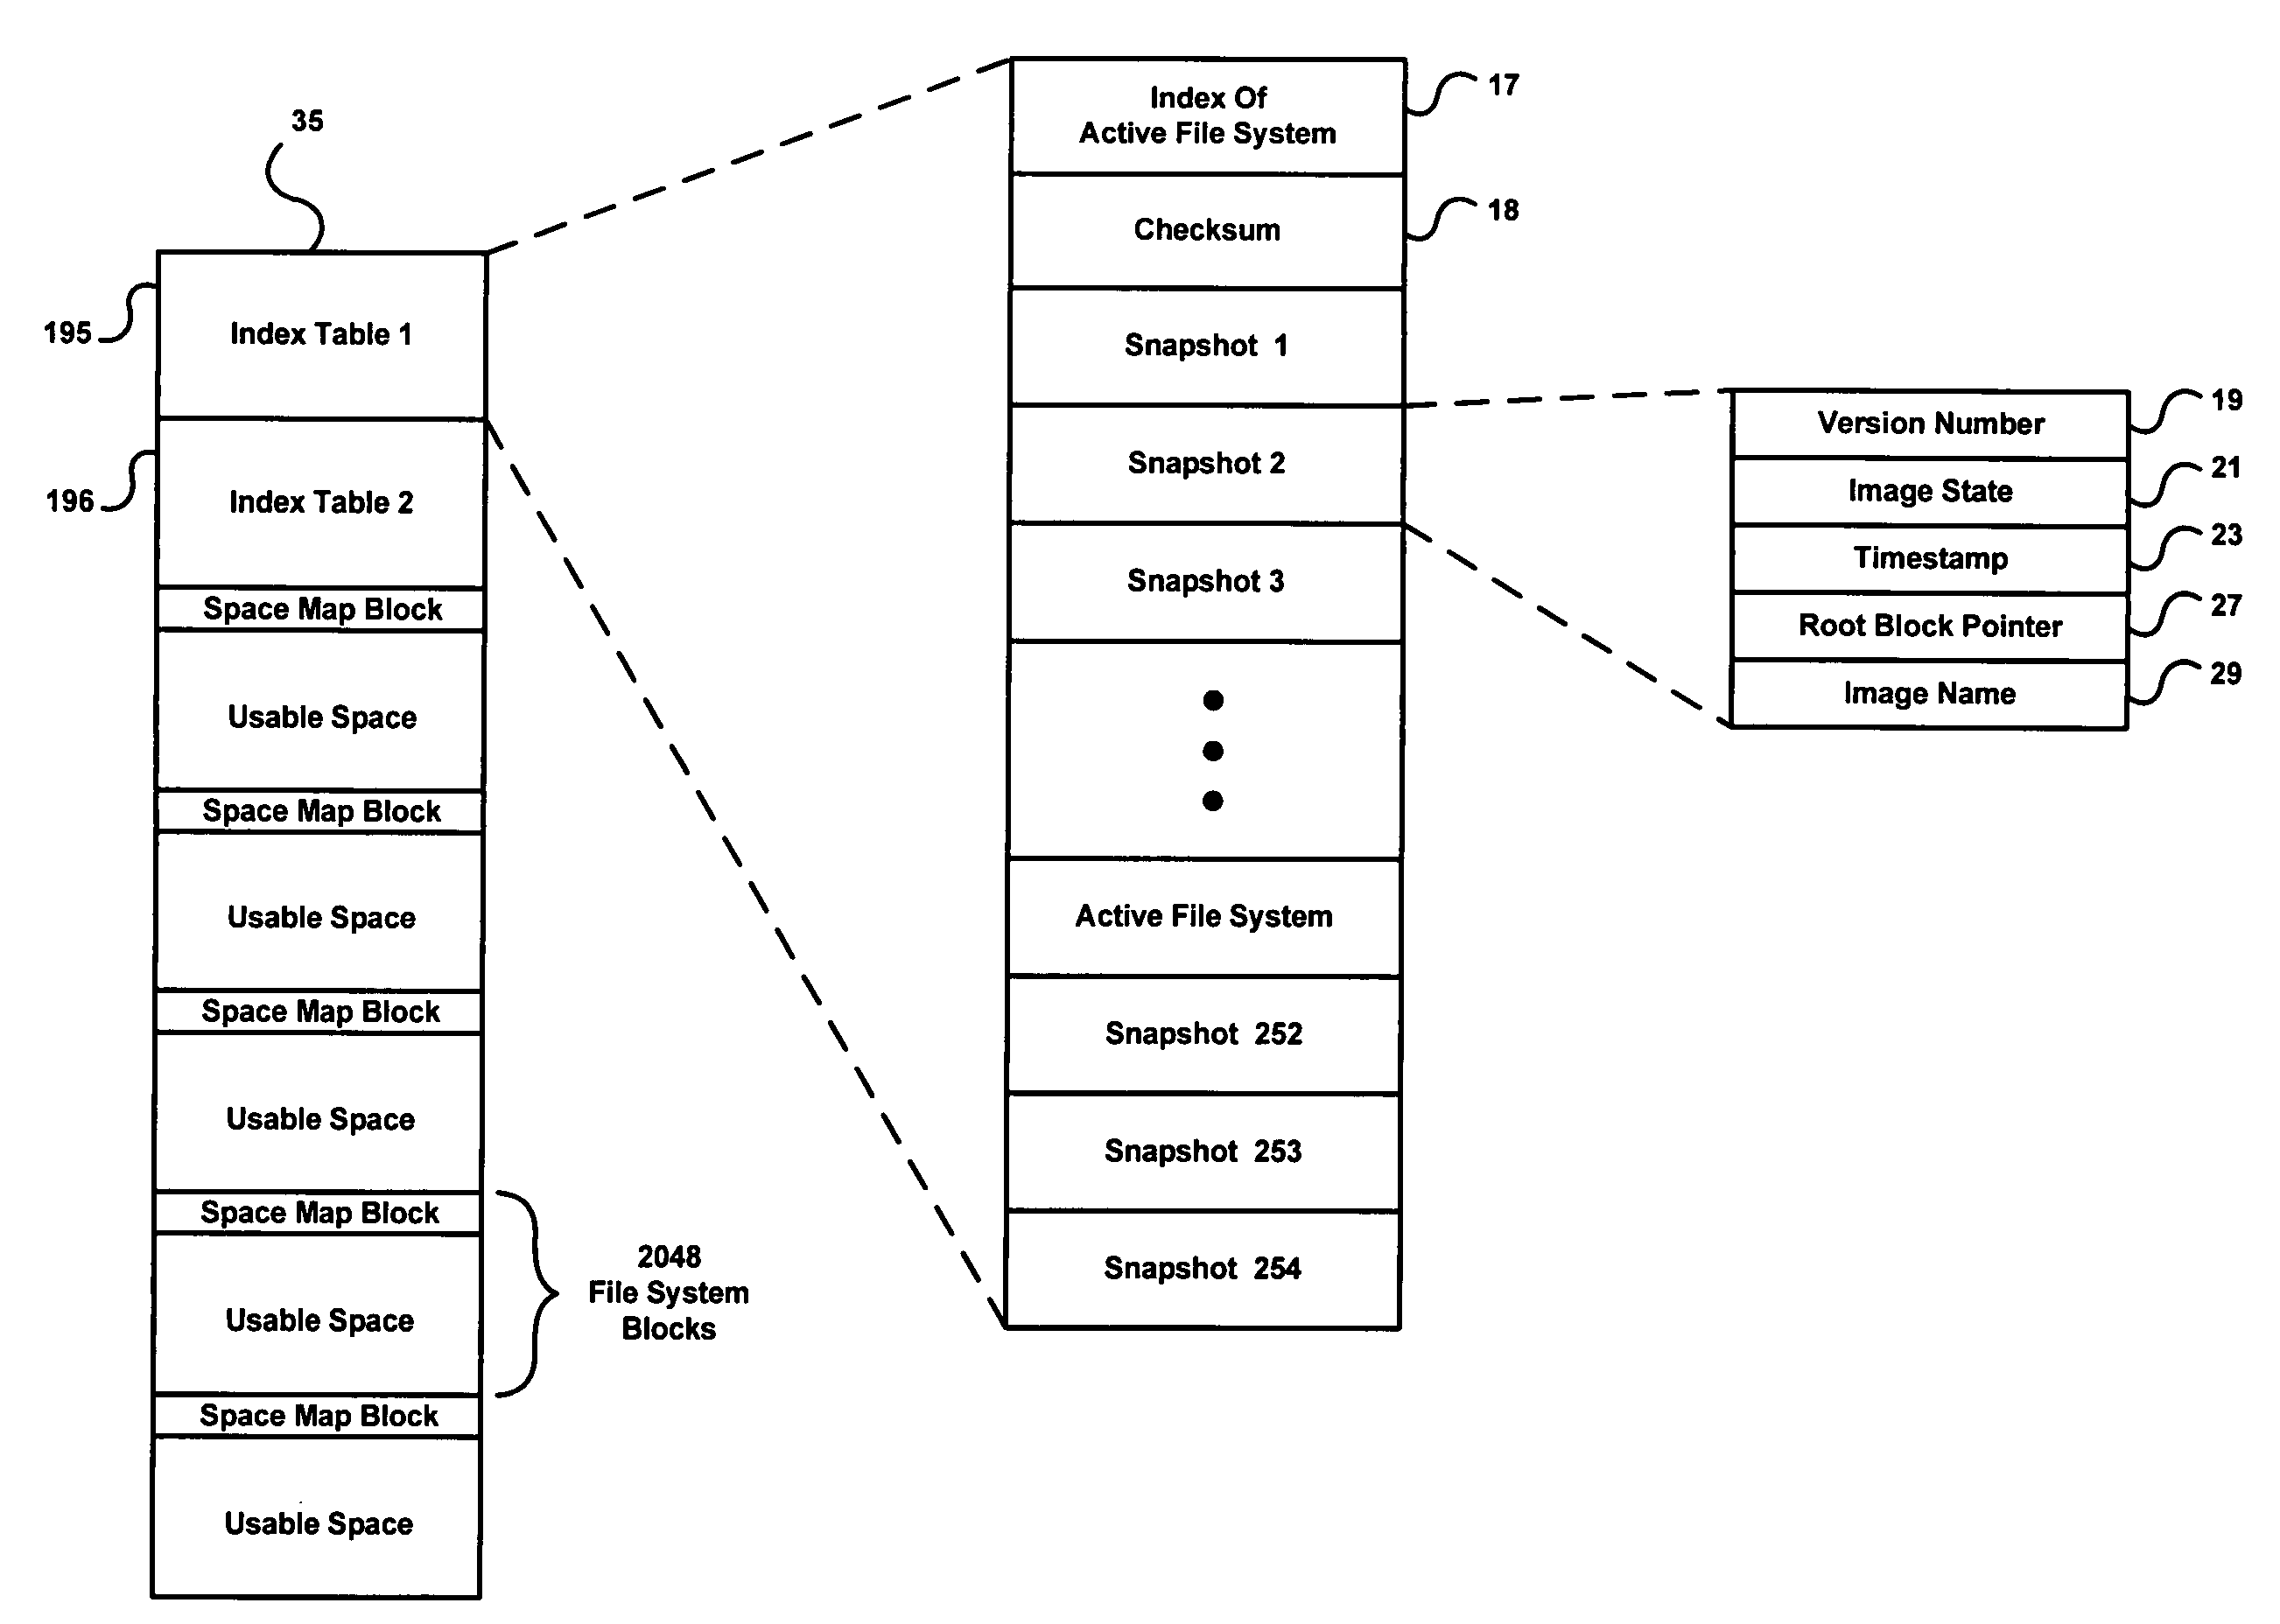 Methods of determining and searching for modified blocks in a file system